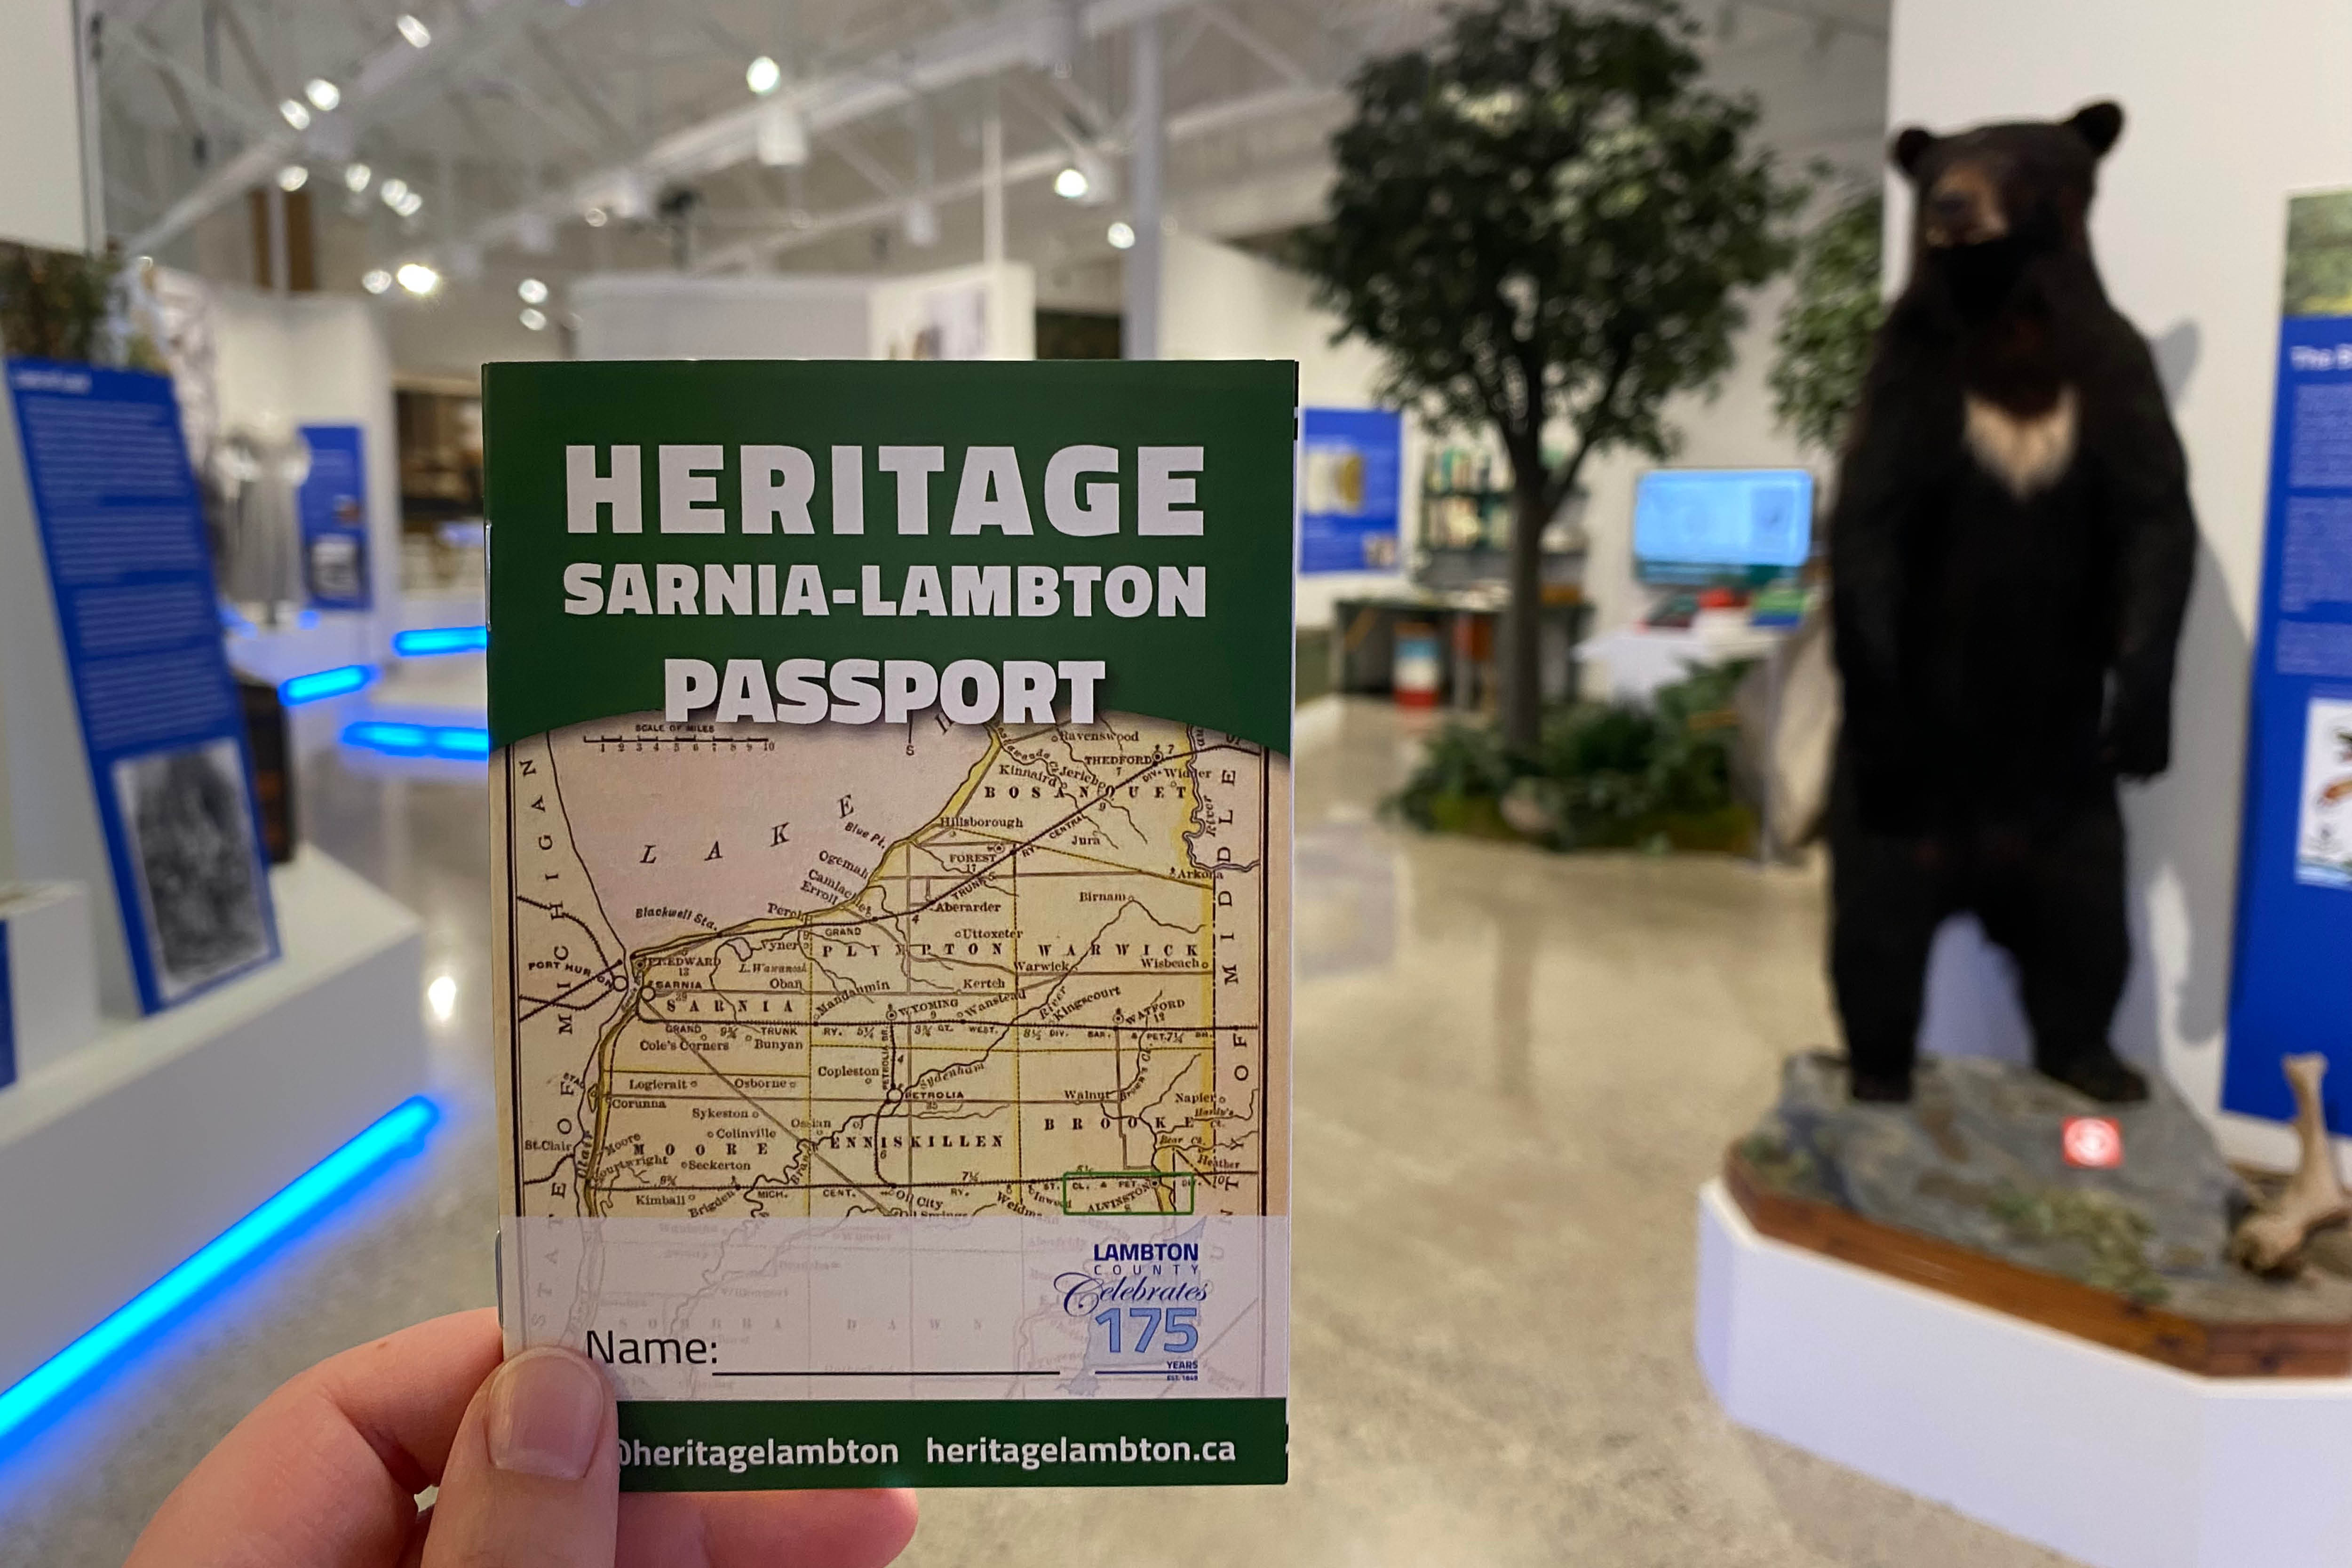 A HSL Passport booklet is held up by a human hand in front of the entrance to the Lambton Gallery in Lambton Heritage Museum.